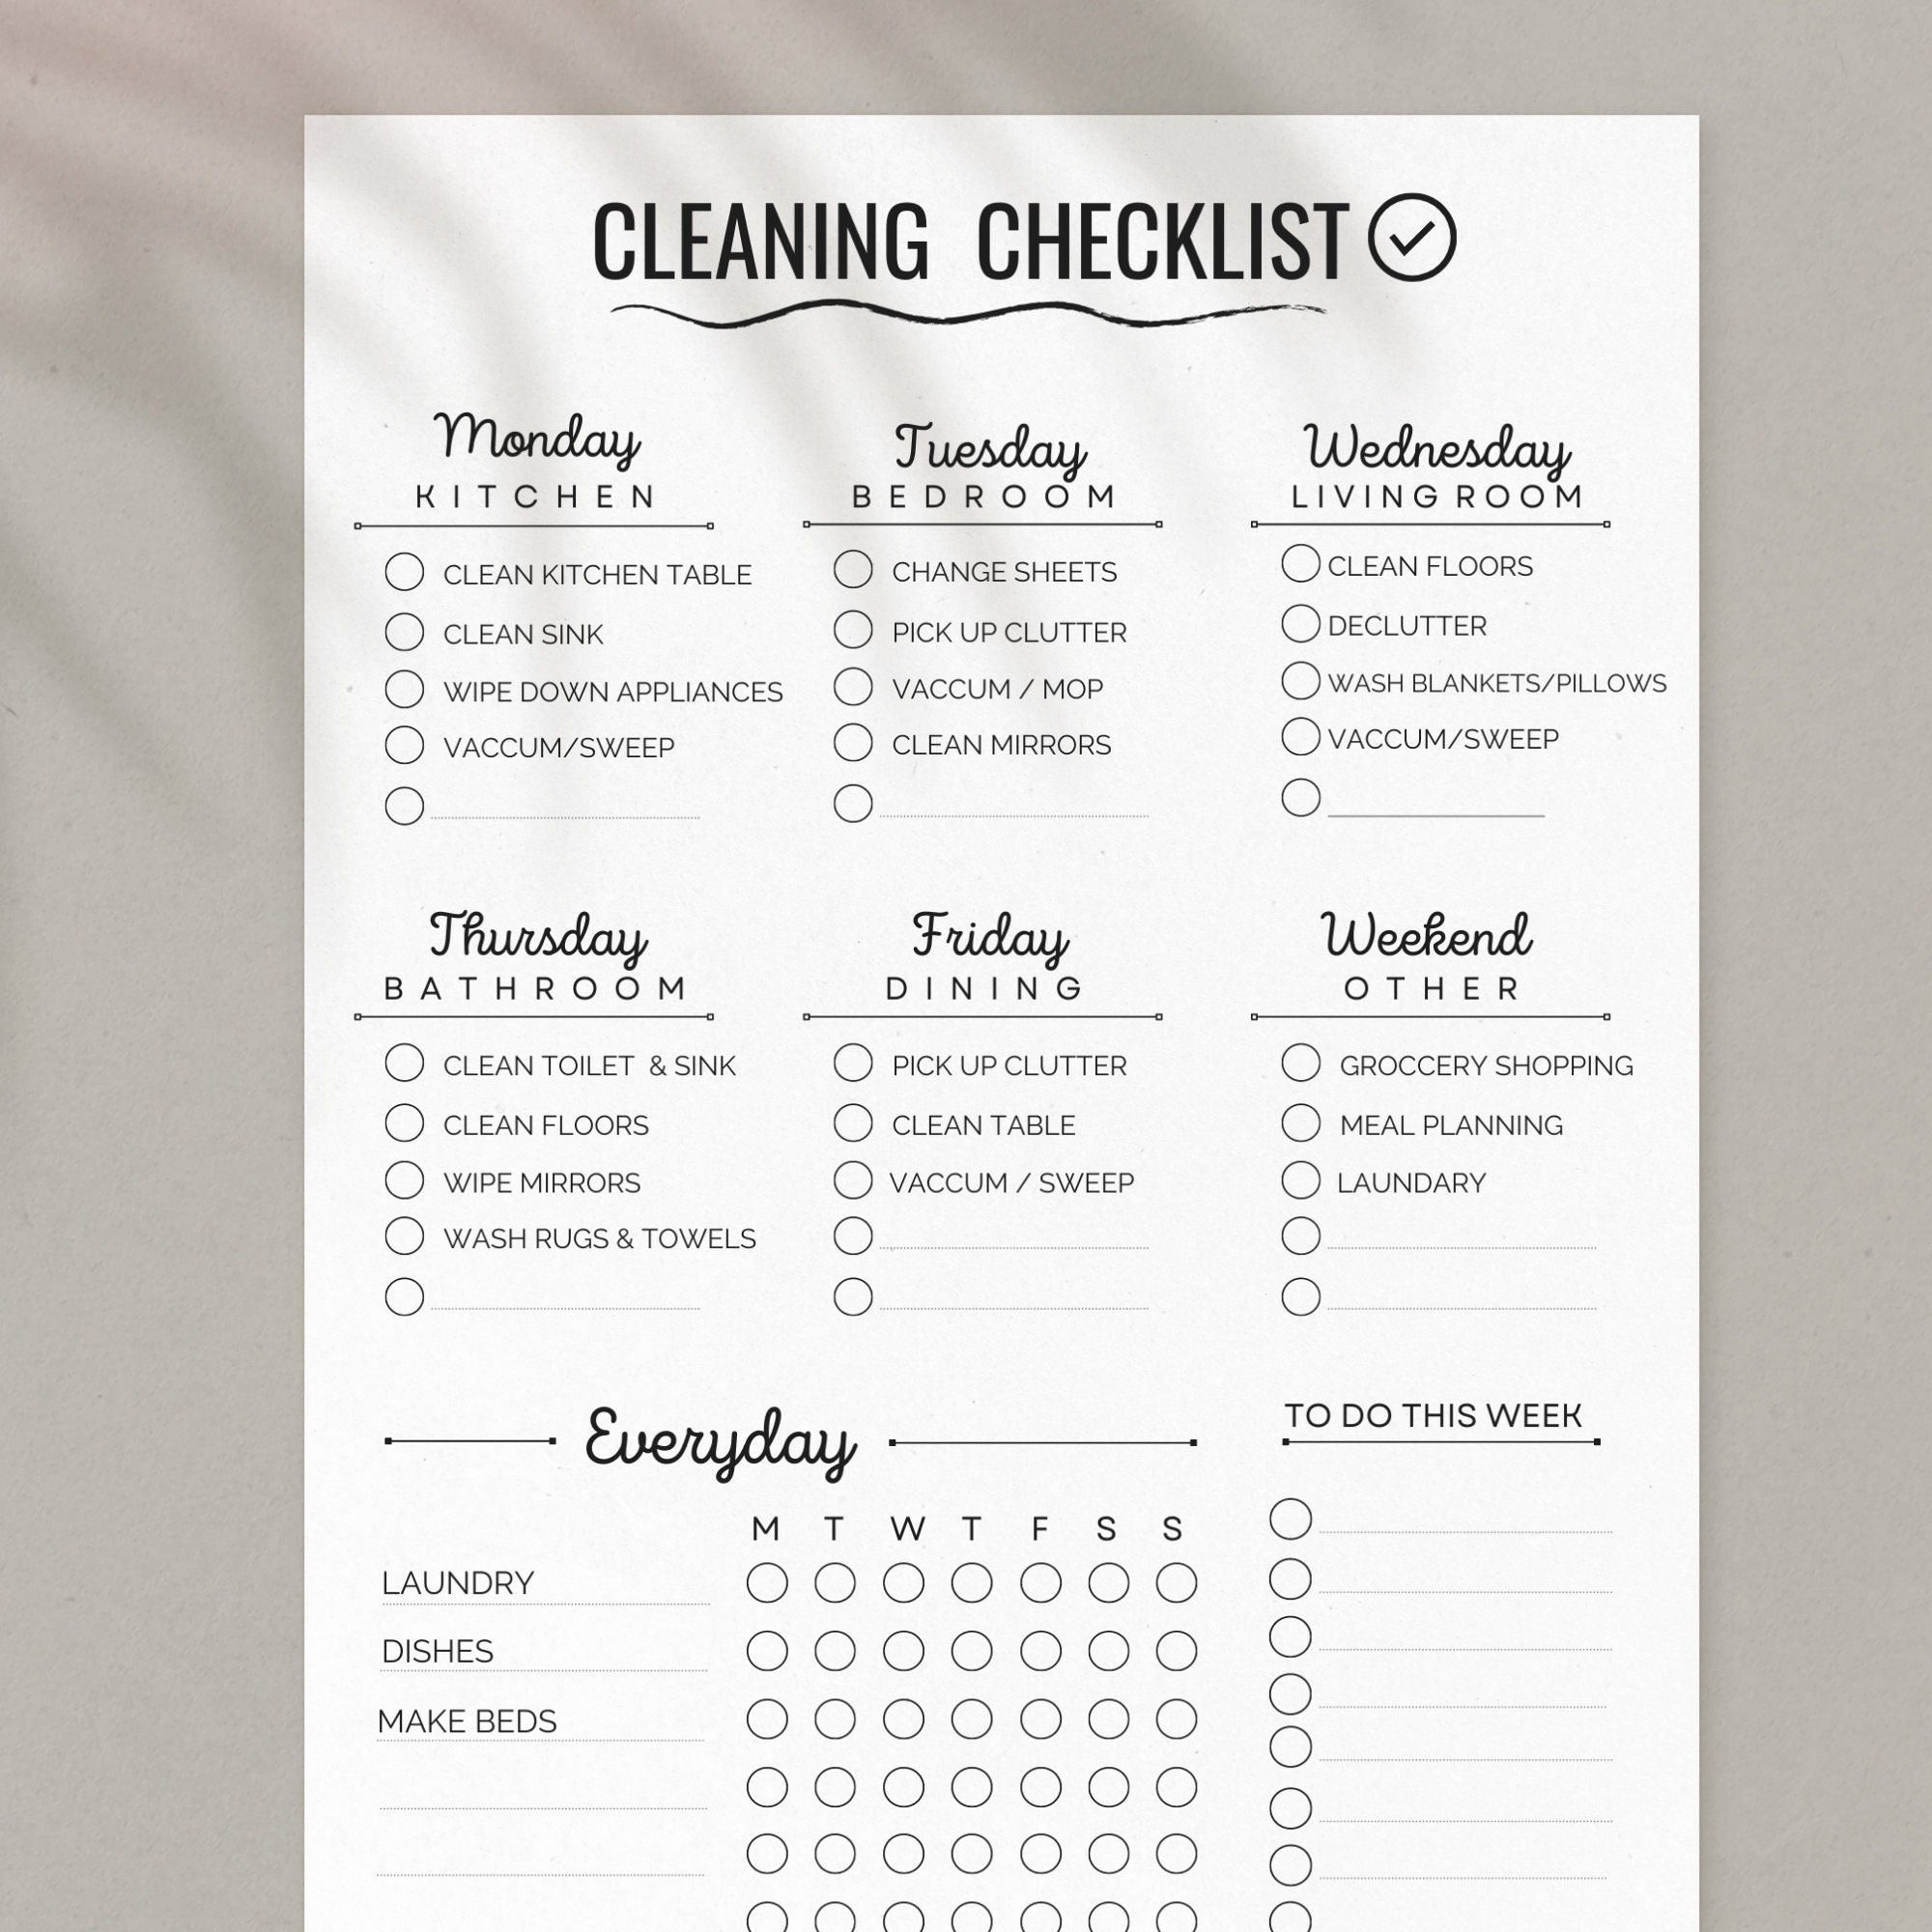 Daily quick-cleaning checklist – SheKnows